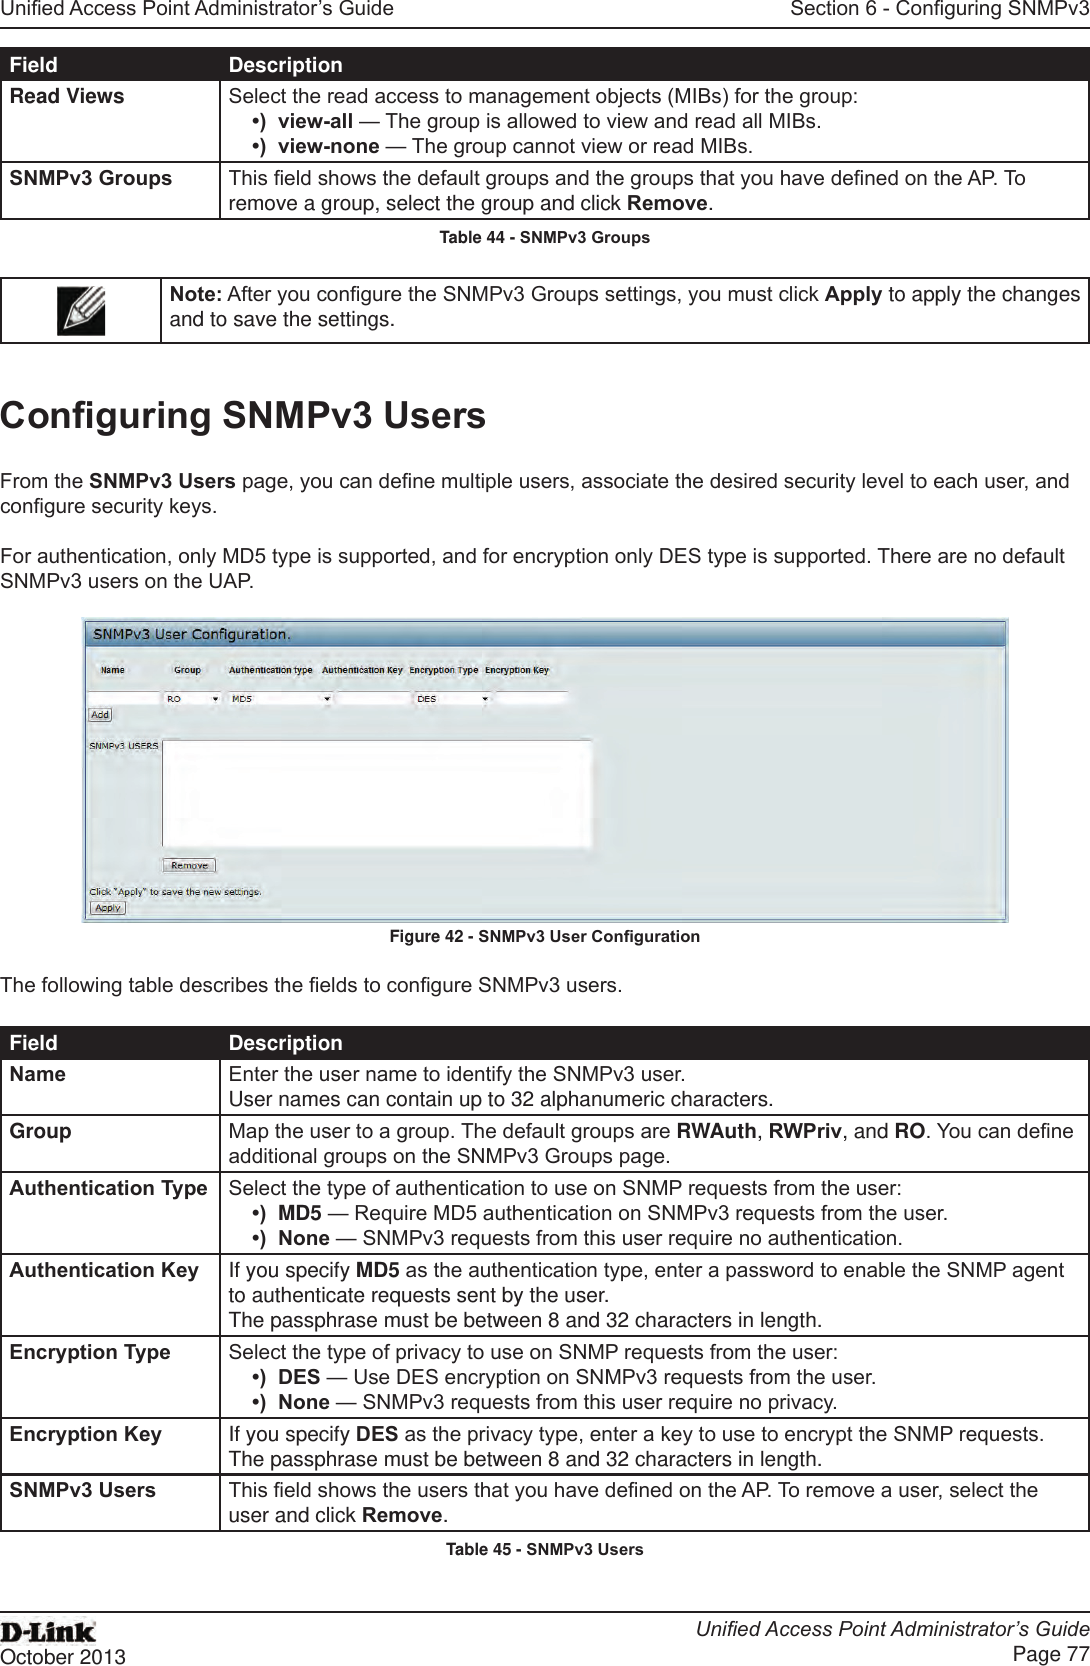 Unied Access Point Administrator’s GuideUnied Access Point Administrator’s GuidePage 77October 2013Section 6 - Conguring SNMPv3Field DescriptionRead Views Select the read access to management objects (MIBs) for the group:•)  view-all — The group is allowed to view and read all MIBs.•)  view-none — The group cannot view or read MIBs.SNMPv3 Groups This eld shows the default groups and the groups that you have dened on the AP. To remove a group, select the group and click Remove.Table 44 - SNMPv3 GroupsNote: After you congure the SNMPv3 Groups settings, you must click Apply to apply the changes and to save the settings.Conguring SNMPv3 UsersFrom the SNMPv3 Users page, you can dene multiple users, associate the desired security level to each user, and congure security keys.For authentication, only MD5 type is supported, and for encryption only DES type is supported. There are no default SNMPv3 users on the UAP.Figure 42 - SNMPv3 User CongurationThe following table describes the elds to congure SNMPv3 users.Field DescriptionName Enter the user name to identify the SNMPv3 user. User names can contain up to 32 alphanumeric characters.Group Map the user to a group. The default groups are RWAuth, RWPriv, and RO. You can dene additional groups on the SNMPv3 Groups page.Authentication Type Select the type of authentication to use on SNMP requests from the user:•)  MD5 — Require MD5 authentication on SNMPv3 requests from the user.•)  None — SNMPv3 requests from this user require no authentication.Authentication Key If you specify MD5 as the authentication type, enter a password to enable the SNMP agent to authenticate requests sent by the user.The passphrase must be between 8 and 32 characters in length.Encryption Type Select the type of privacy to use on SNMP requests from the user:•)  DES — Use DES encryption on SNMPv3 requests from the user.•)  None — SNMPv3 requests from this user require no privacy.Encryption Key If you specify DES as the privacy type, enter a key to use to encrypt the SNMP requests.The passphrase must be between 8 and 32 characters in length.SNMPv3 Users This eld shows the users that you have dened on the AP. To remove a user, select the user and click Remove.Table 45 - SNMPv3 Users